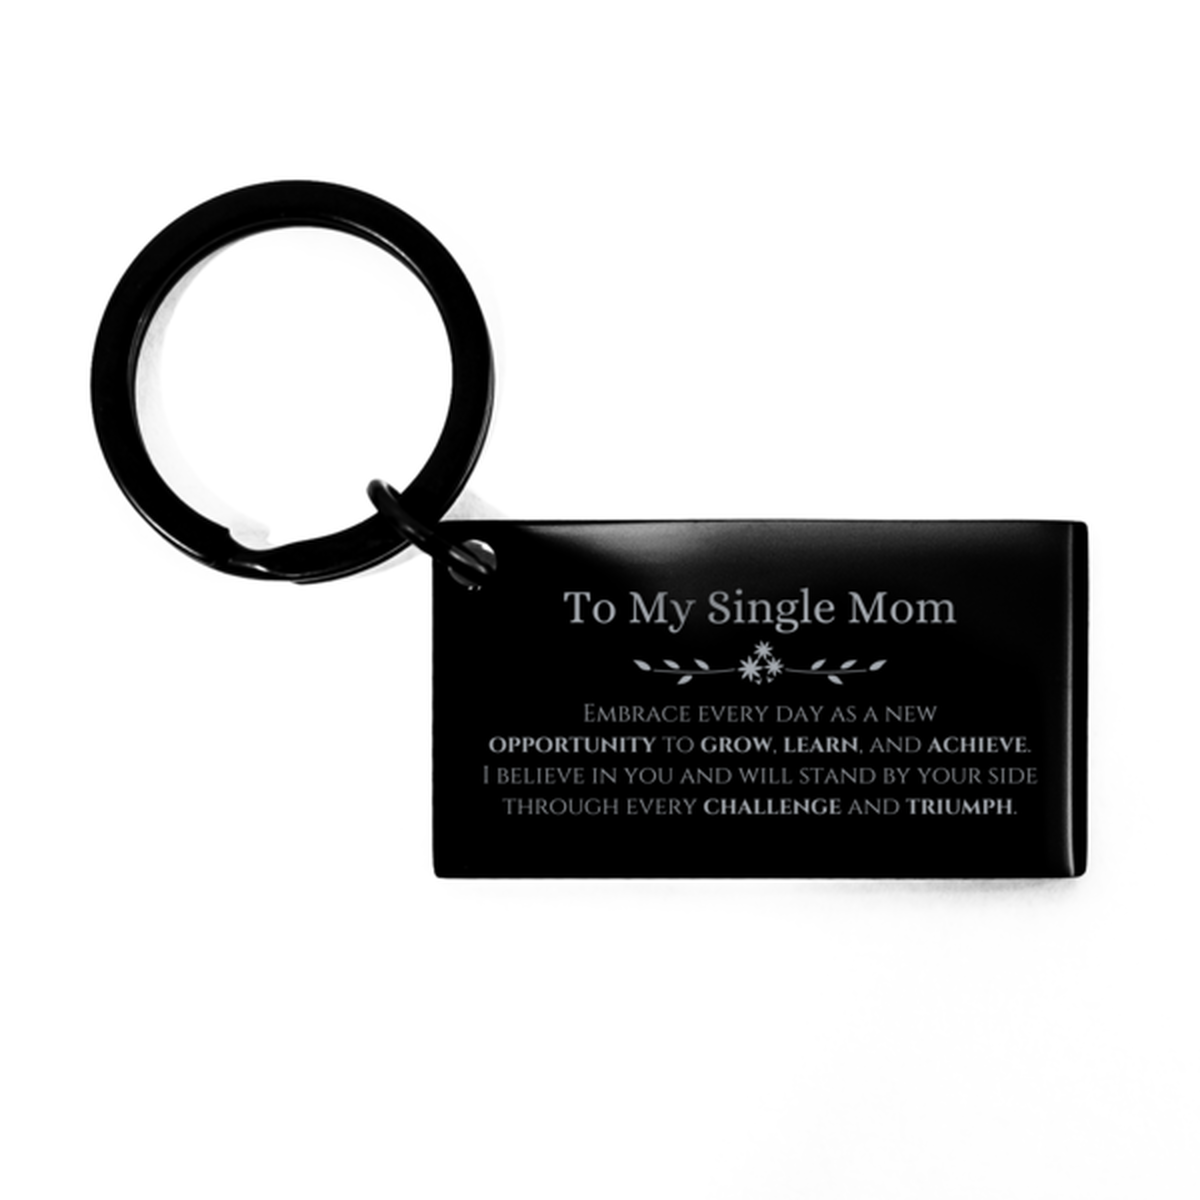 To My Single Mom Gifts, I believe in you and will stand by your side, Inspirational Keychain For Single Mom, Birthday Christmas Motivational Single Mom Gifts